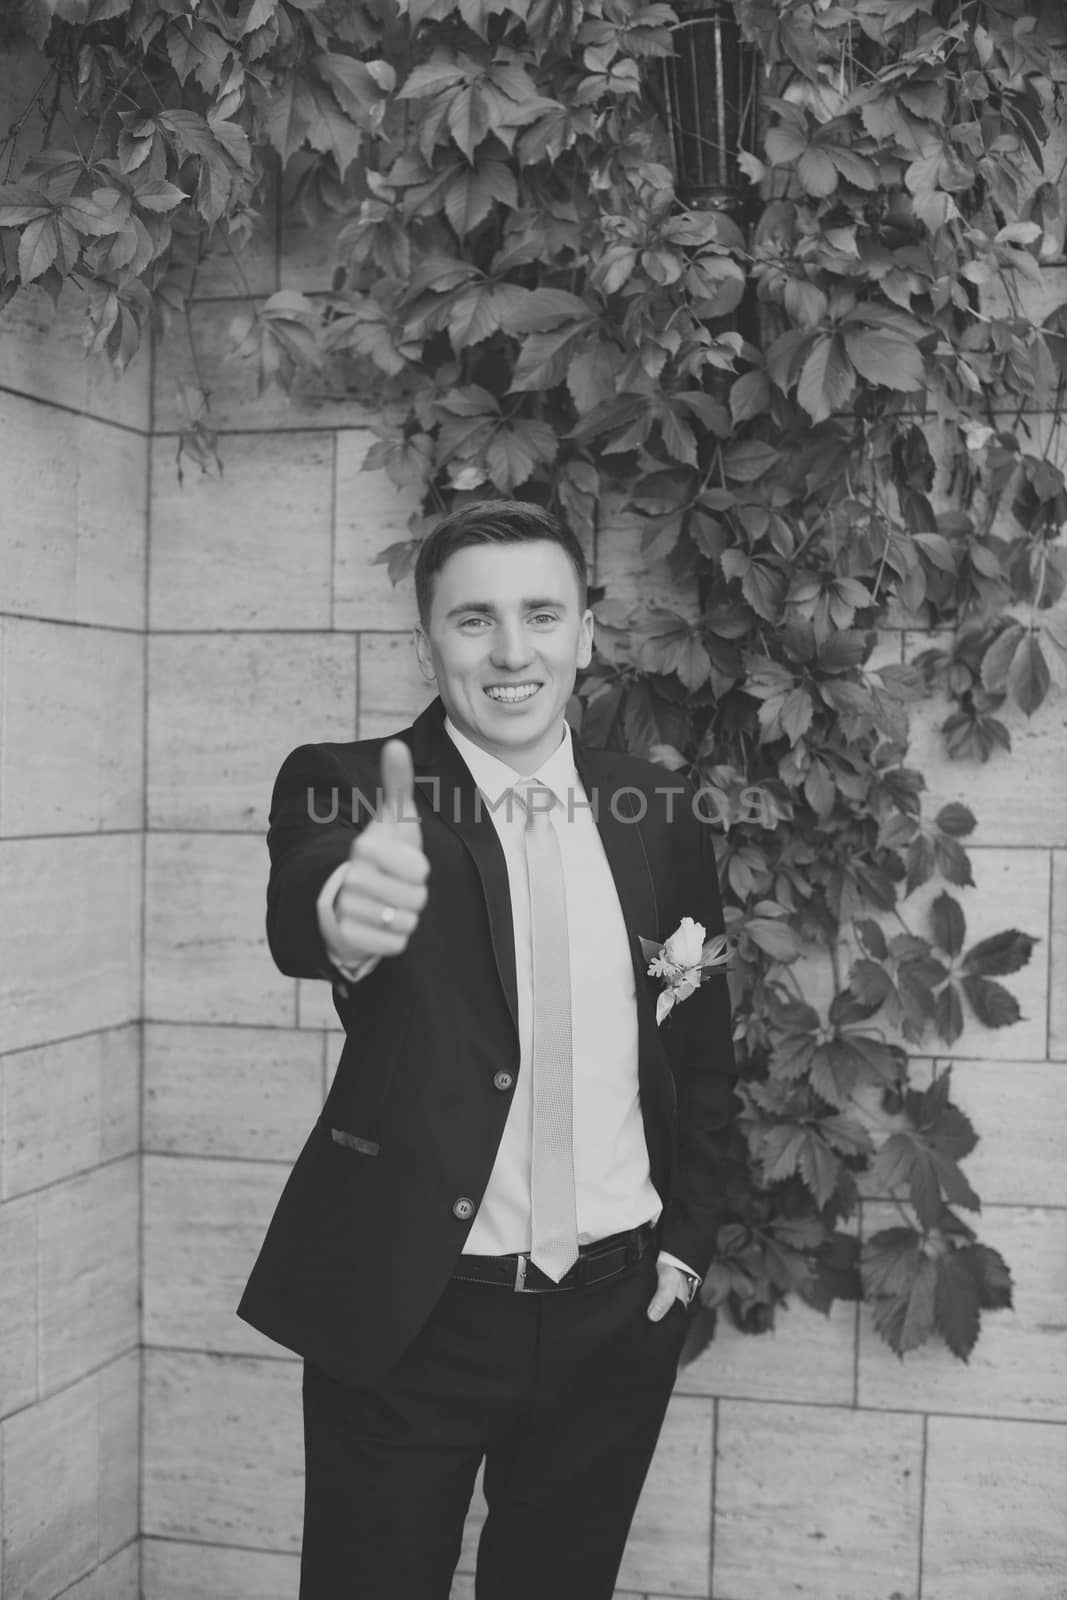 Groom in a stylish suit against a brick wall background by lanser314